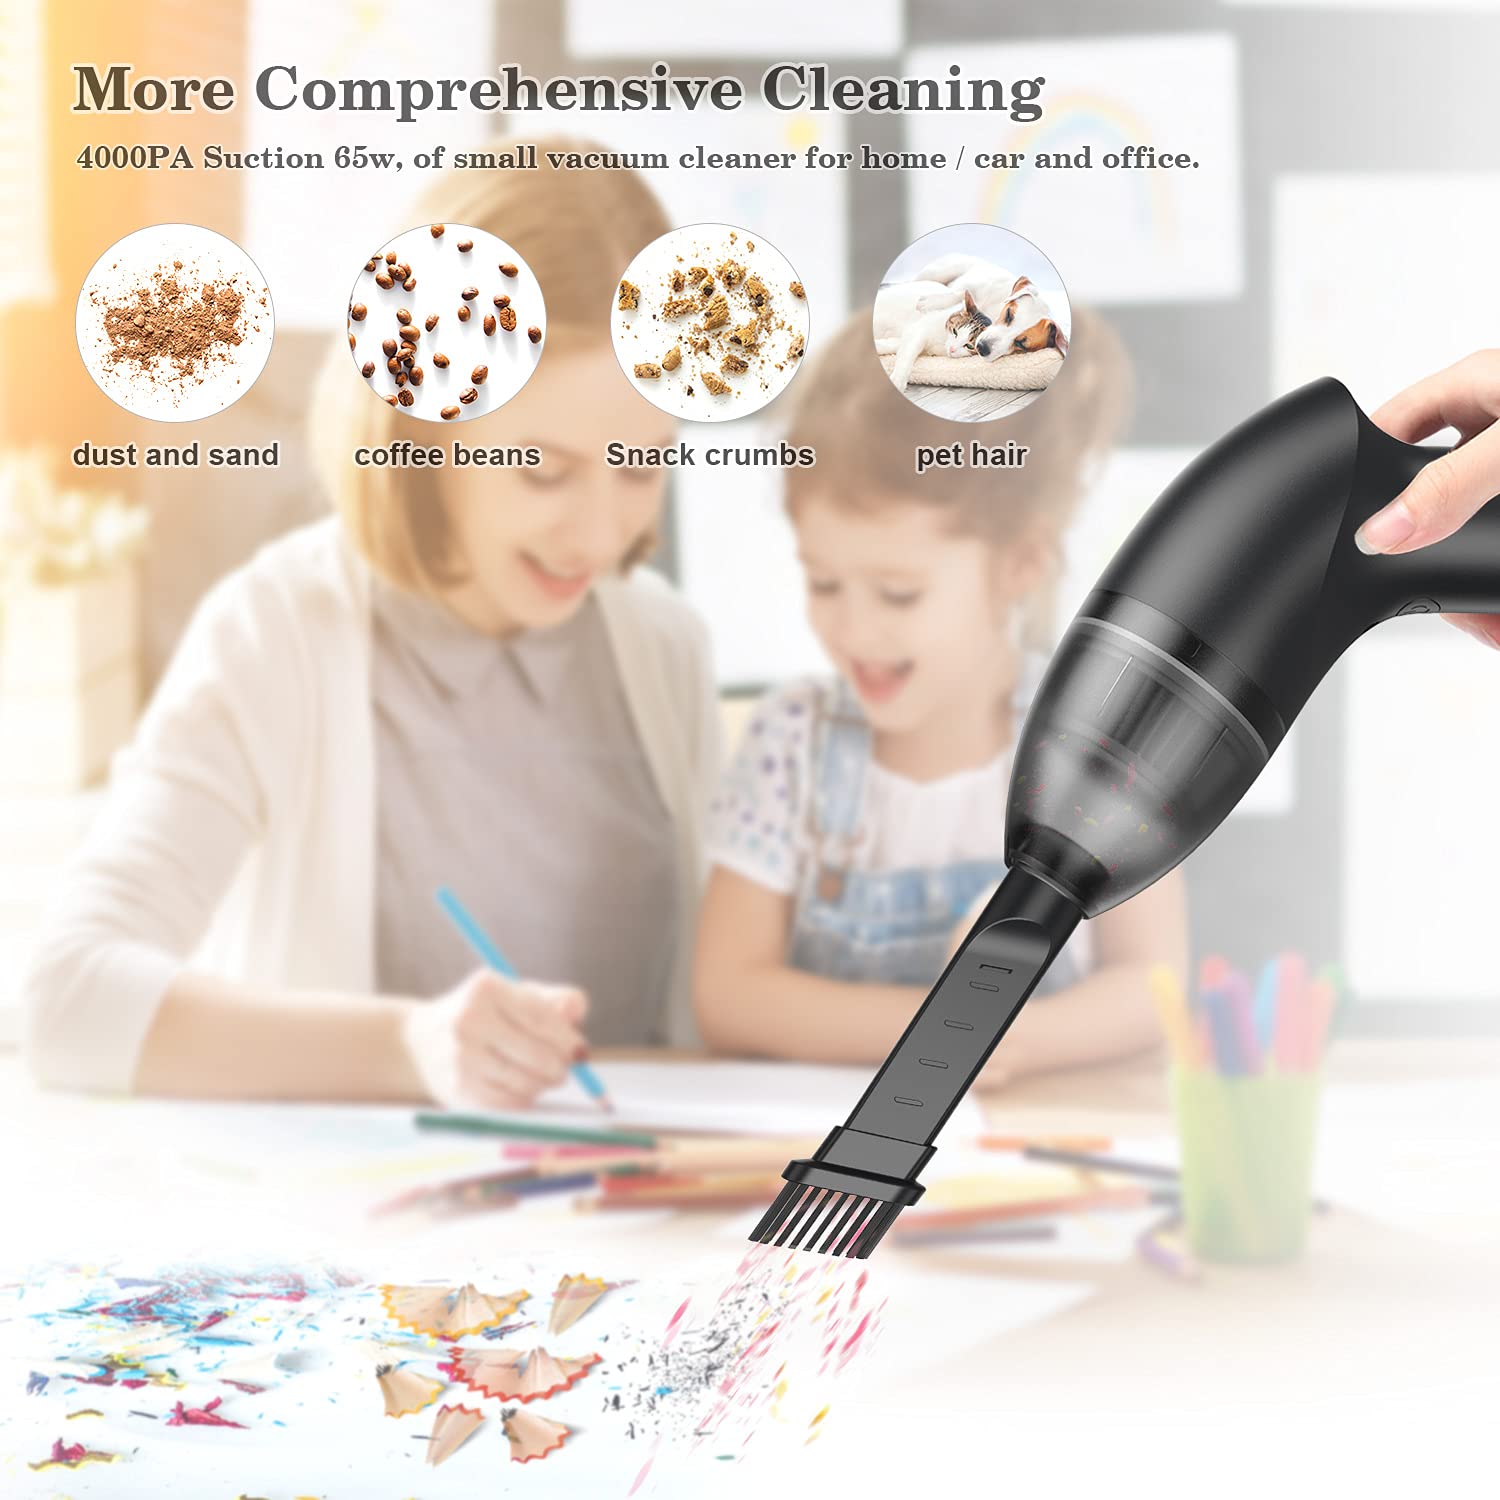 HONKYOB Keyboard Vacuum Cleaner Mini Vacuum Cleaner Rechargeable Cordless Vacuum Desk Vacuum Cleaner Computer Vacuum Cleaners with LED Light for Cleaning Dust,Hair,Crumbs,Car, Sewing Machine (H0431)